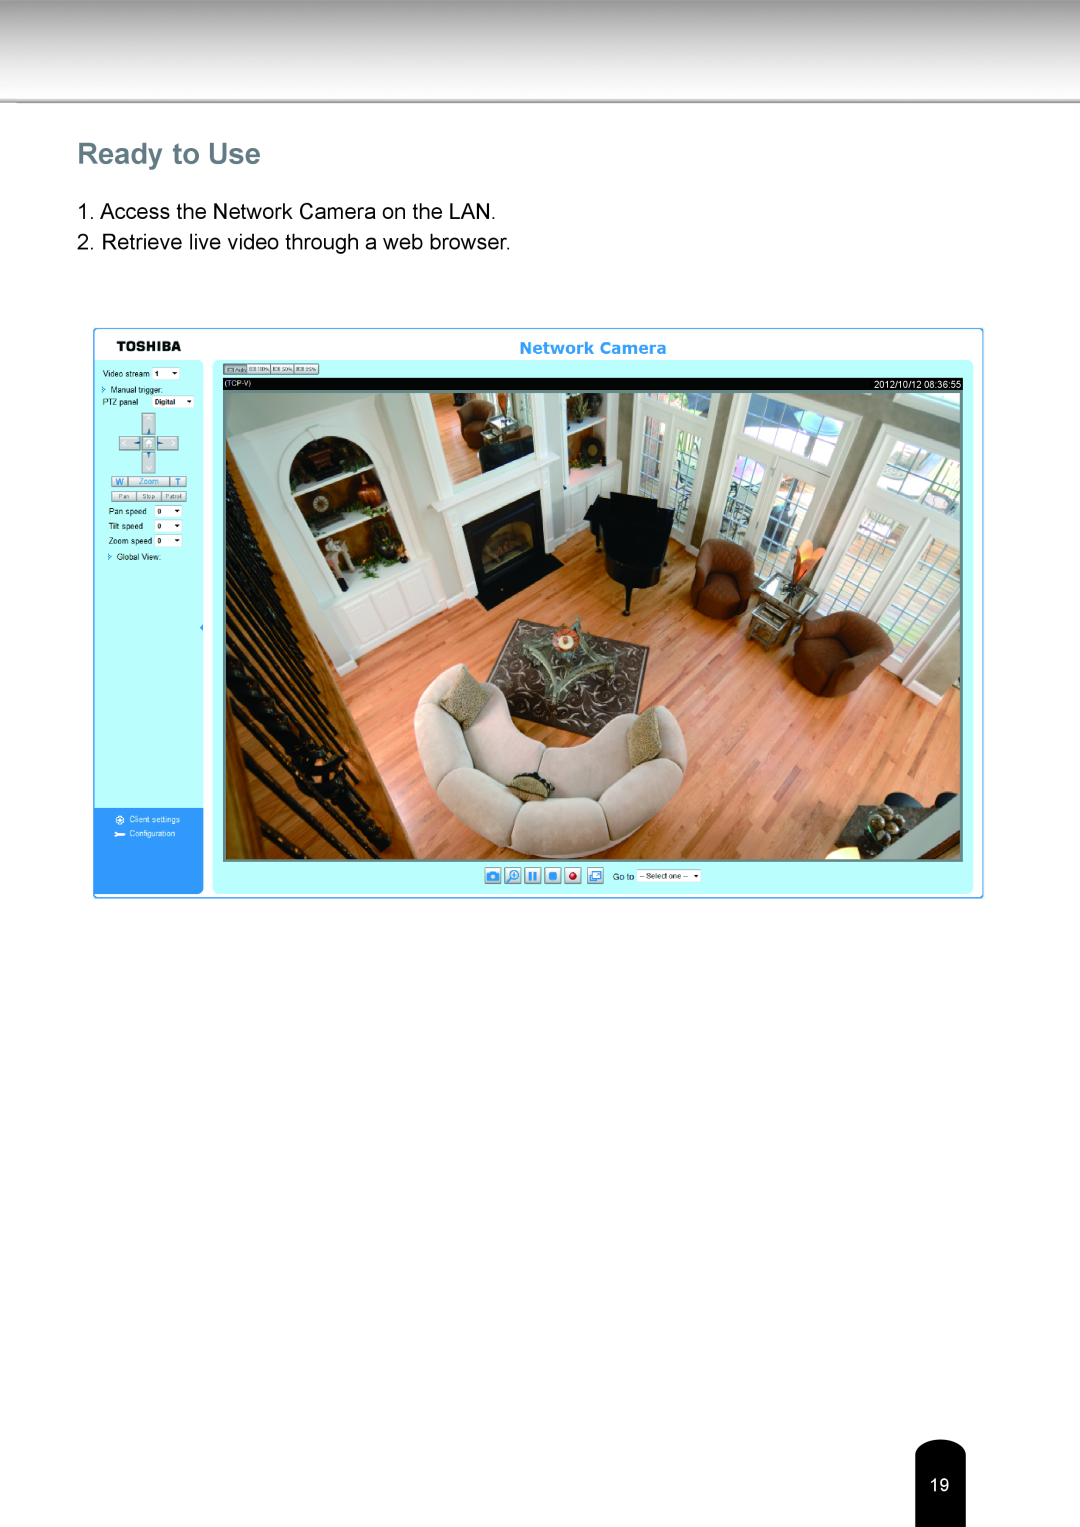 Toshiba IK-WR05A Ready to Use, Access the Network Camera on the LAN, Retrieve live video through a web browser, 2012/10/12 